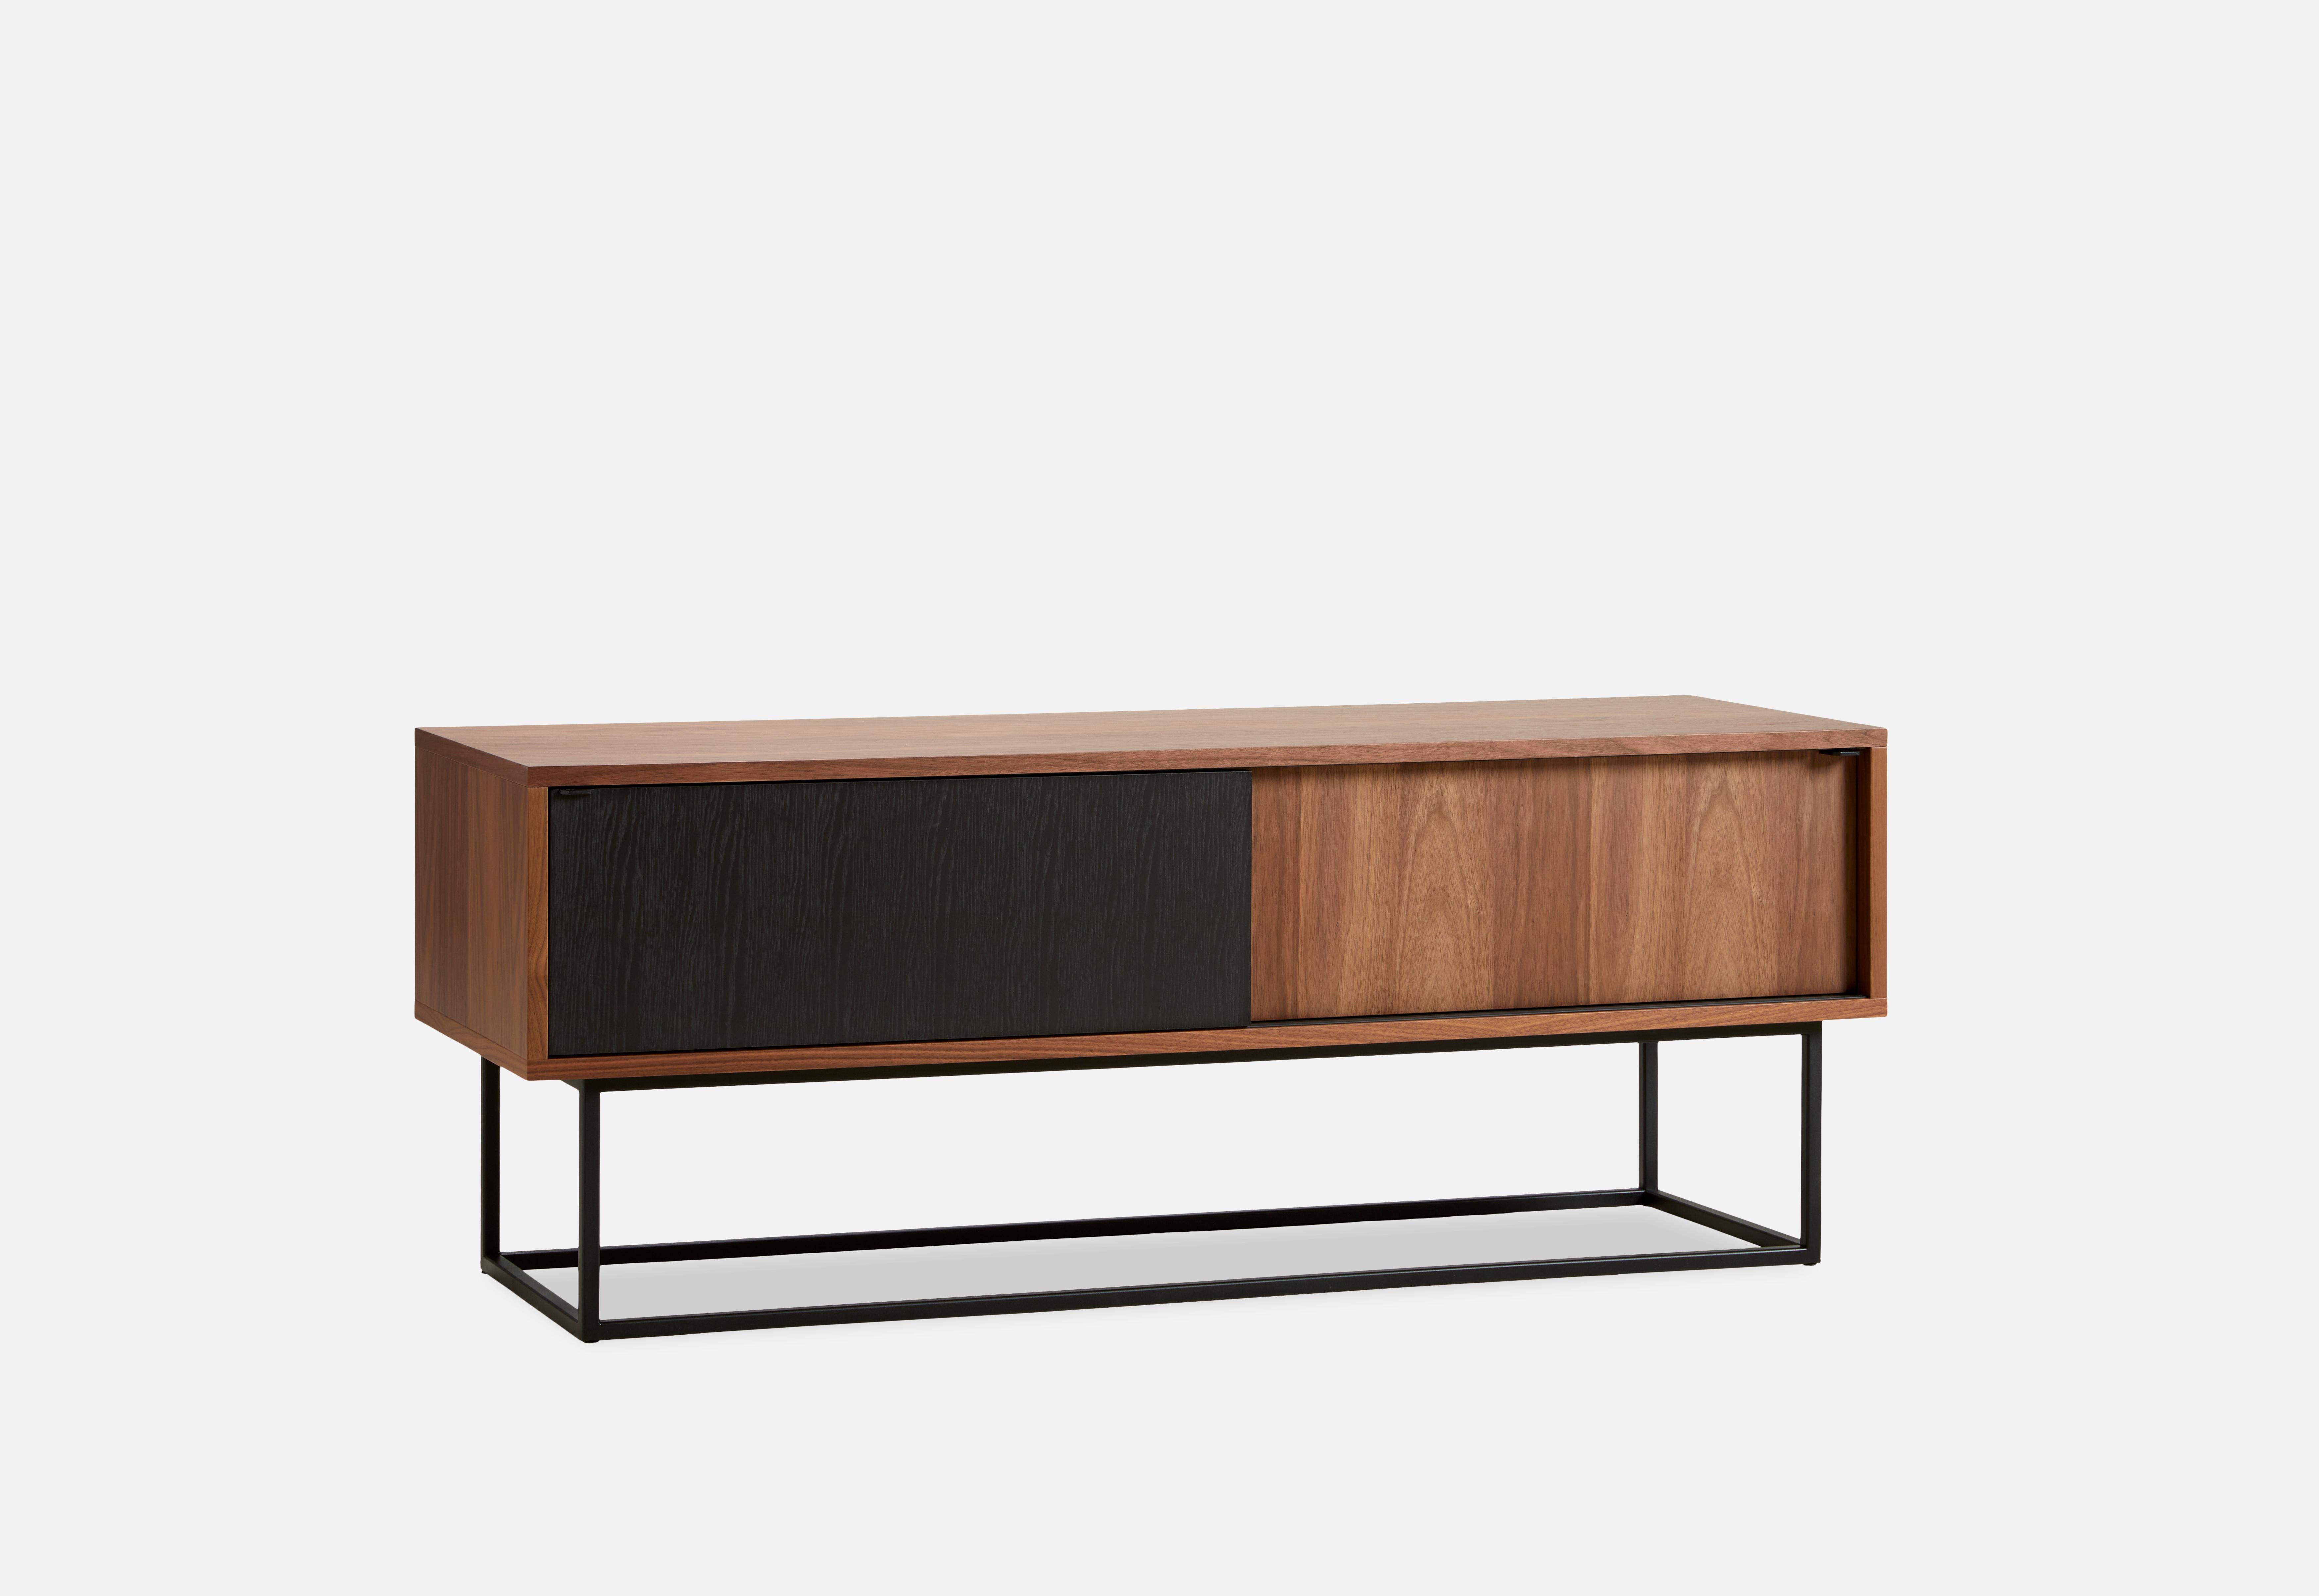 Walnut virka low sideboard by Ropke Design and Moaak
Materials: Walnut, Metal.
Dimensions: D 40 x W 120 x H 47 cm
Also available in different colours and materials.

The founders, Mia and Torben Koed, decided to put their 30 years of experience